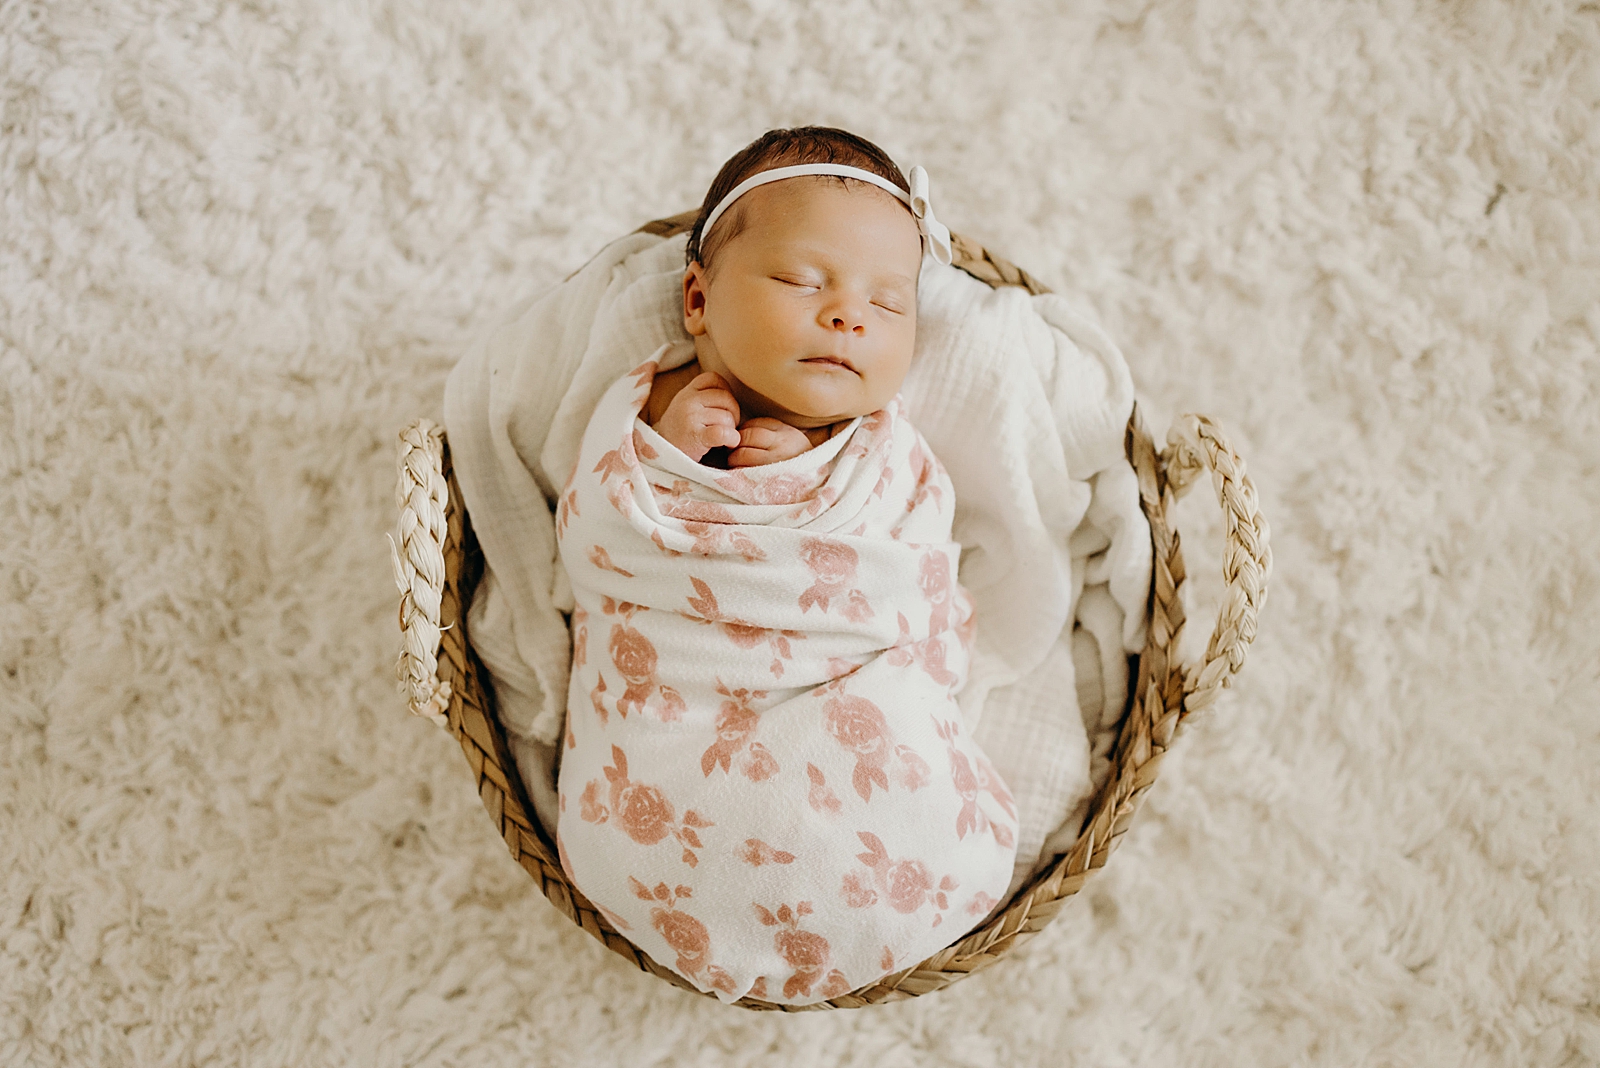 Baby wrapped in floral blanket resting in basket South Florida Newborn Photography Photography captured by South Florida Family Photographer Maggie Alvarez Photography